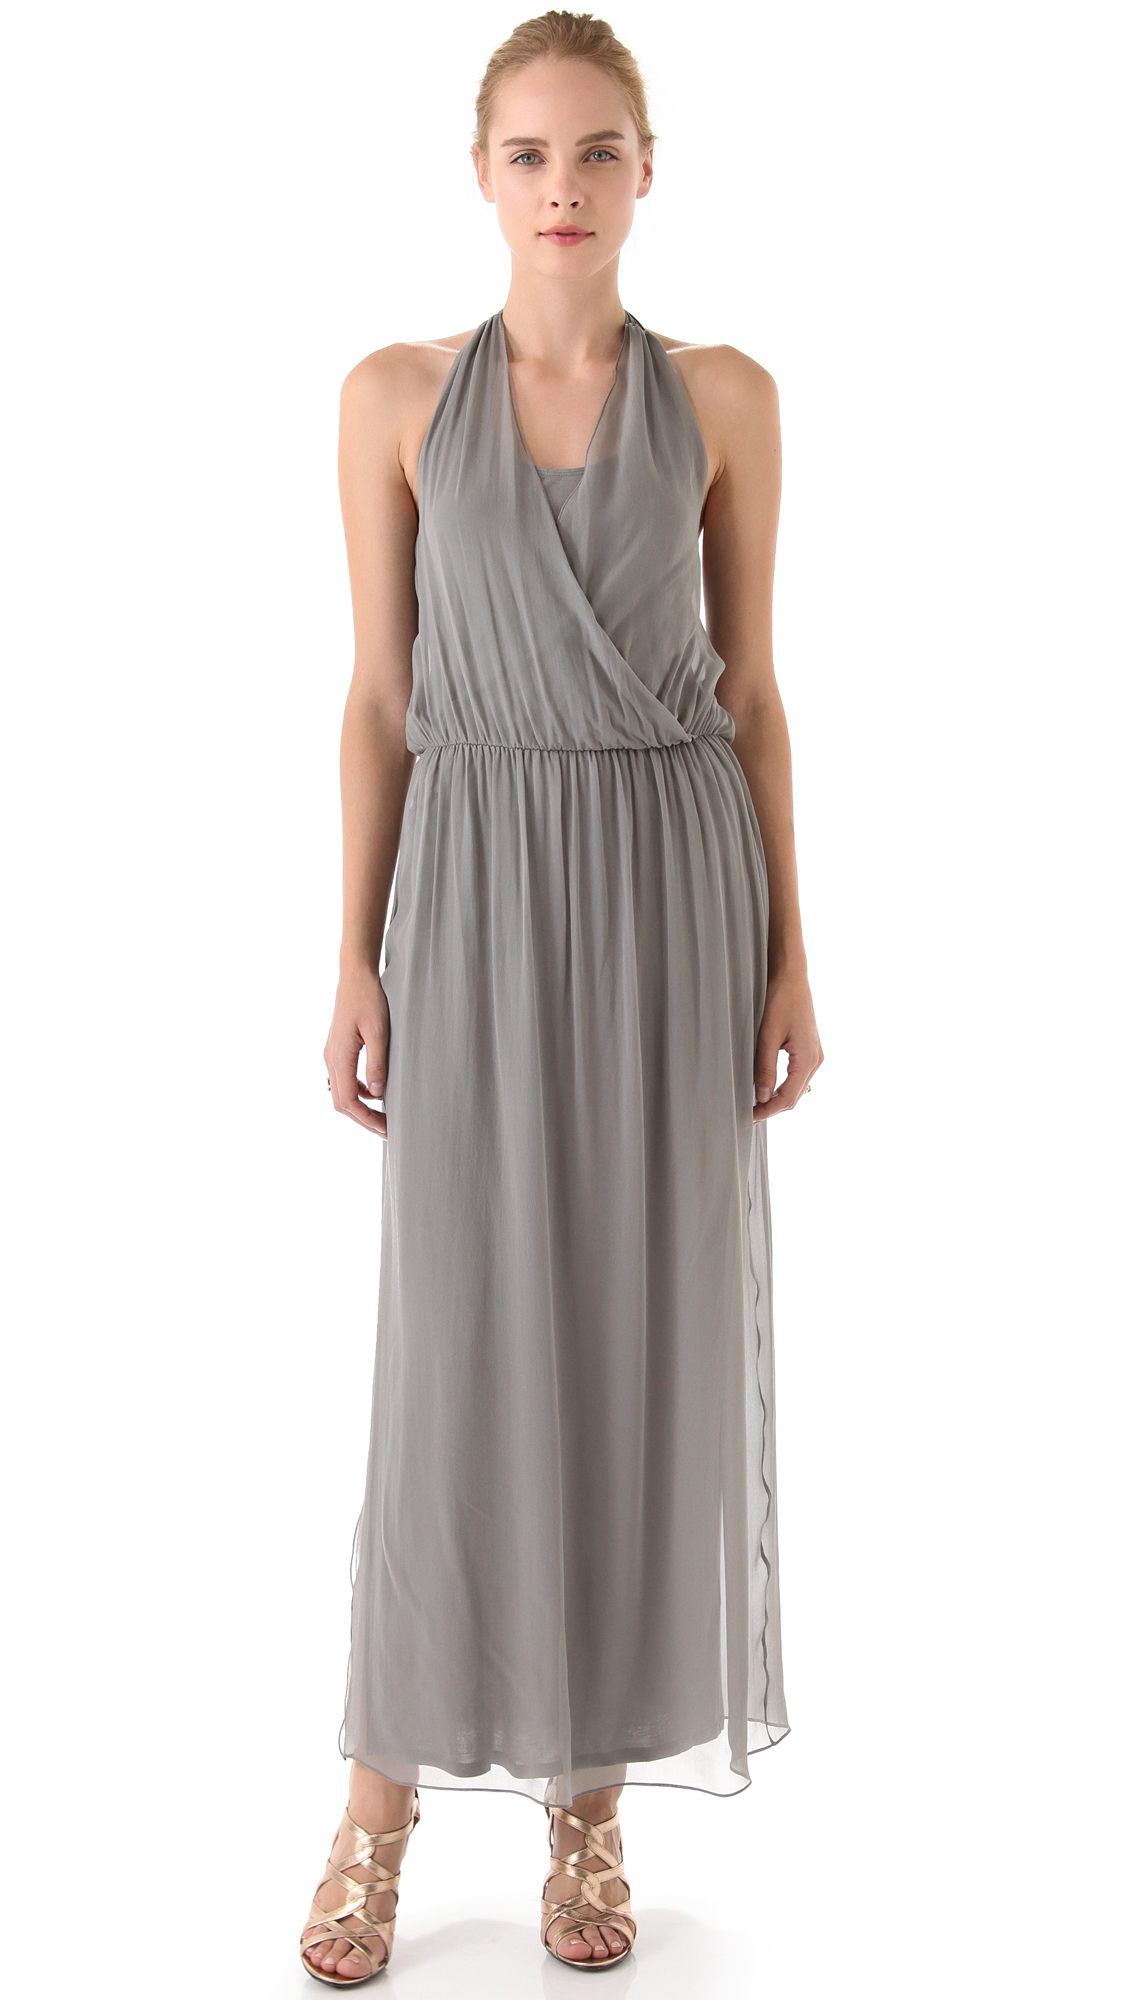 Lyst - Alice + Olivia Wrap Front Maxi Dress in Gray